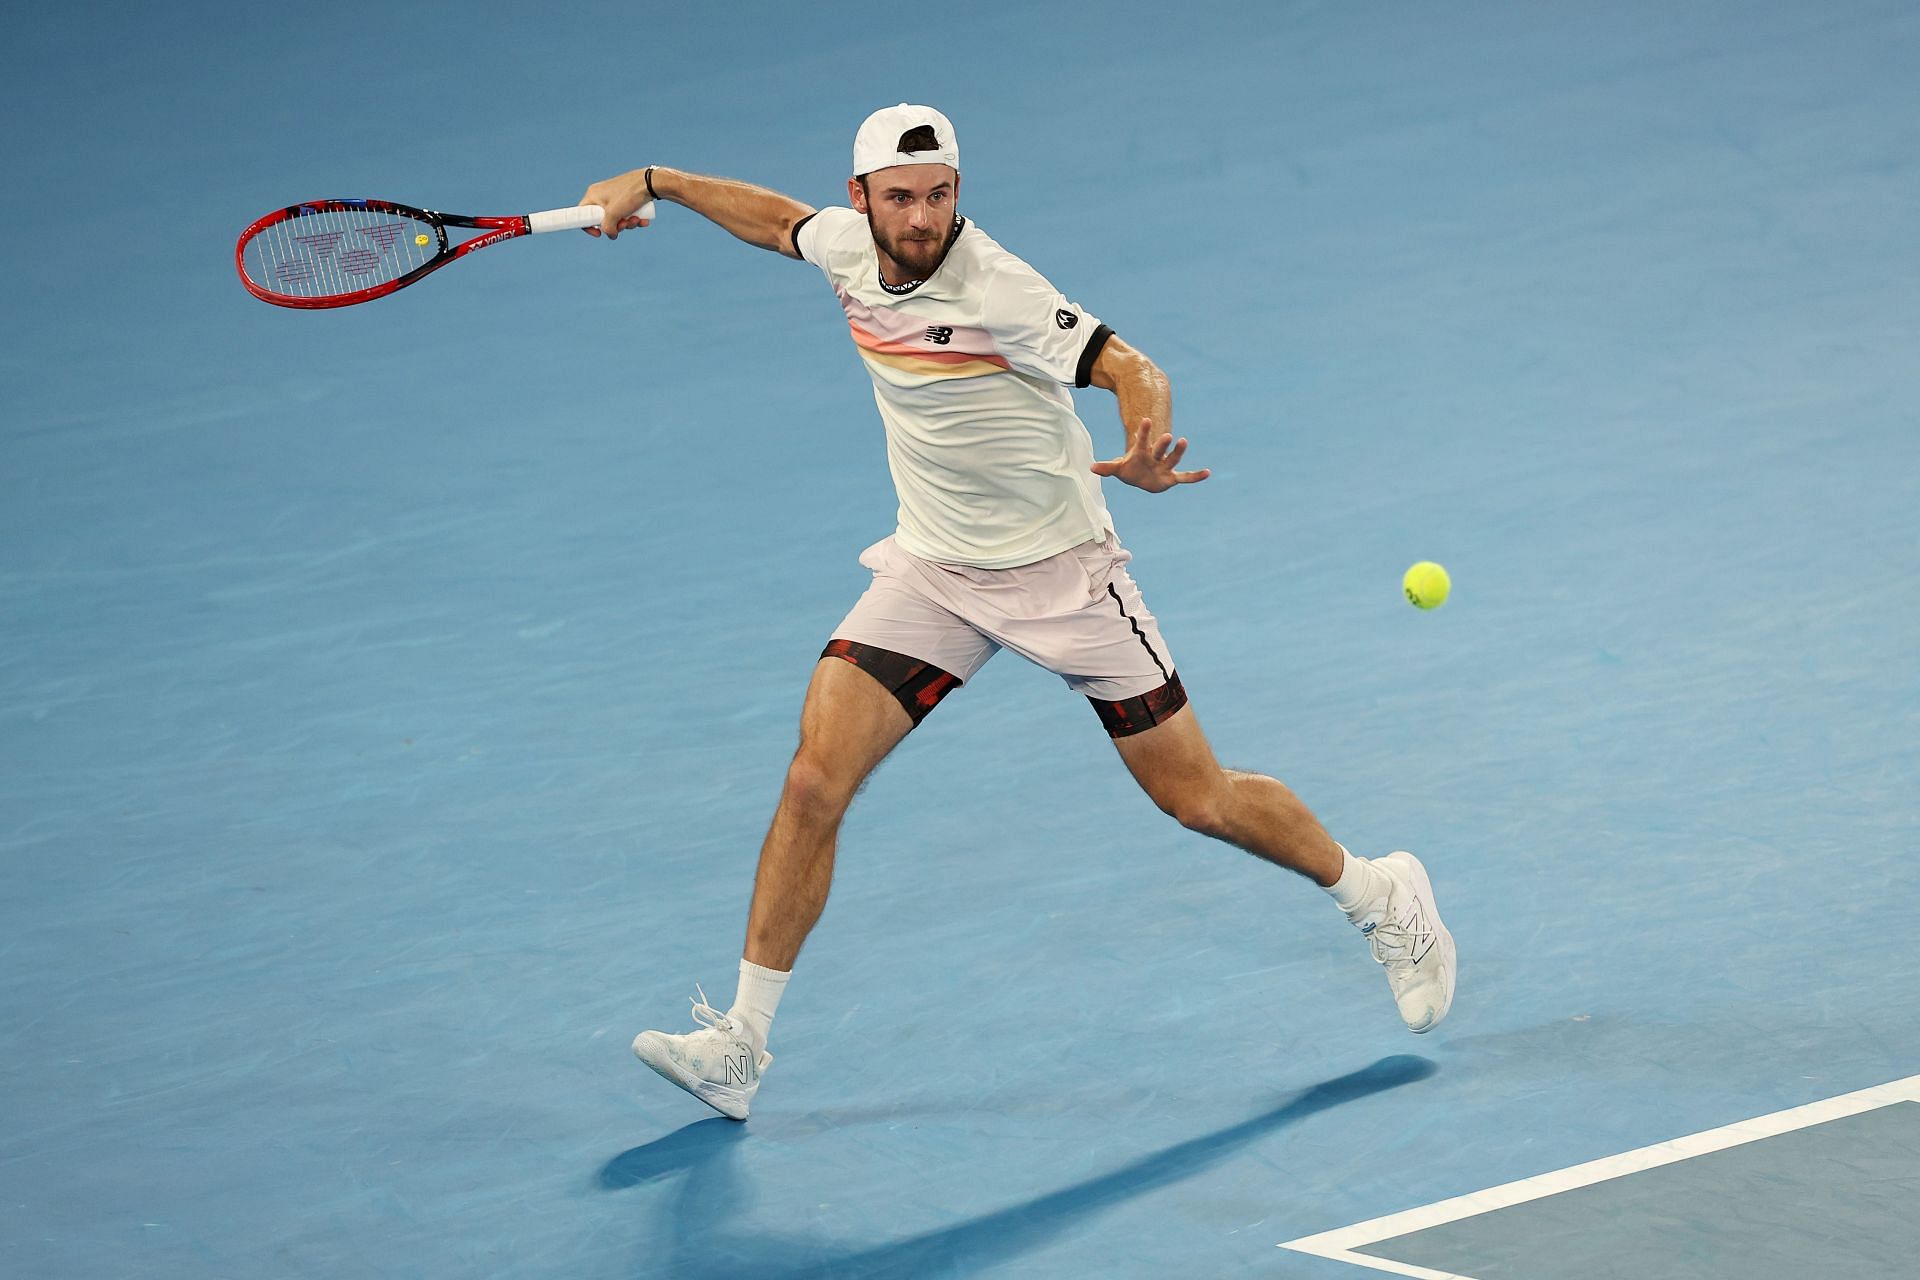 Tommy Paul in action at the Australian Open